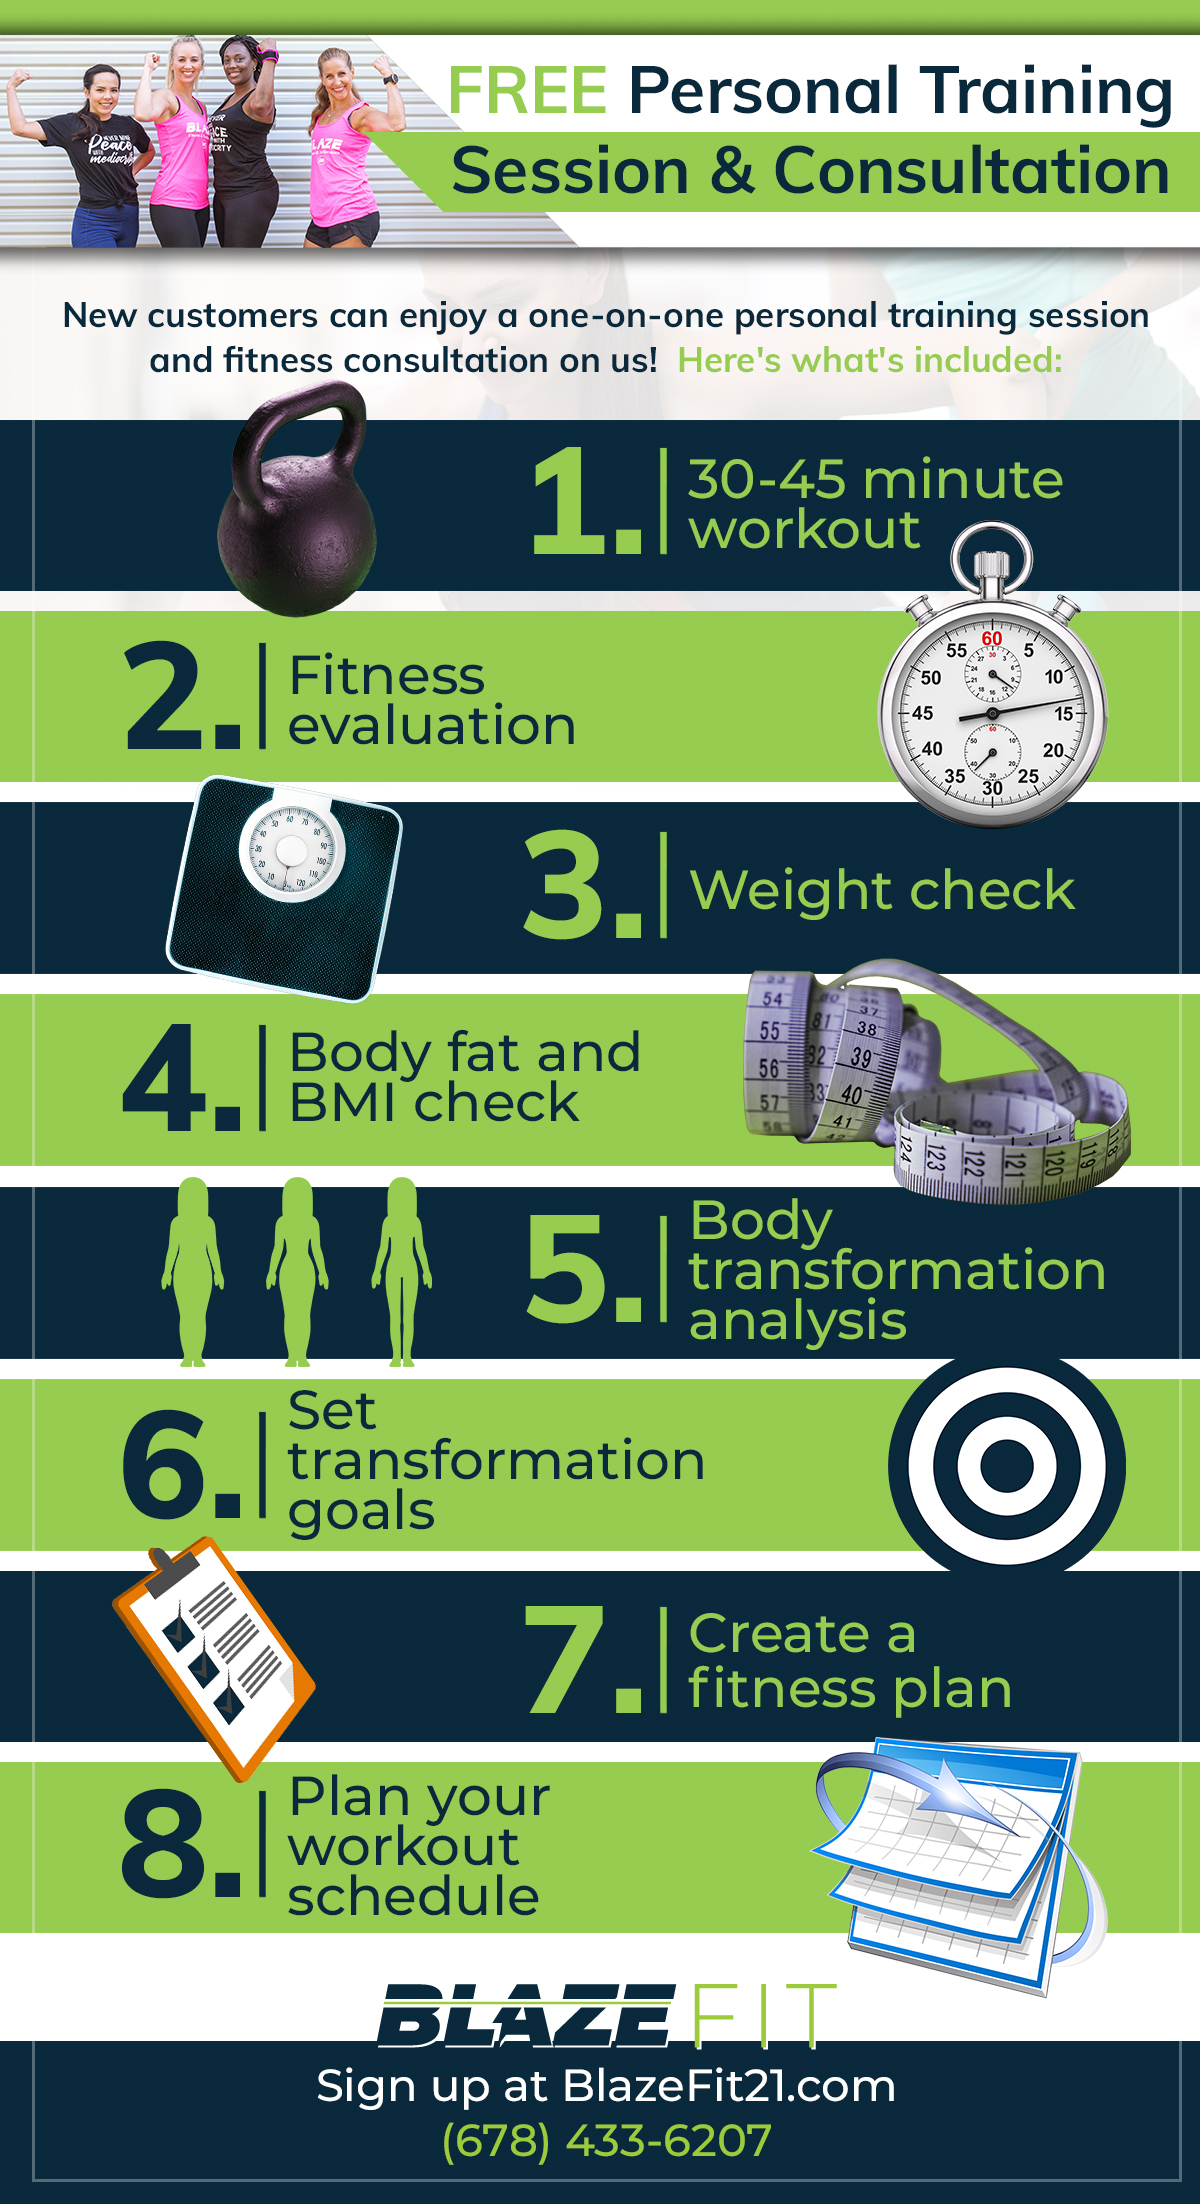 Infographic_FREE Personal Training Session & Consultation